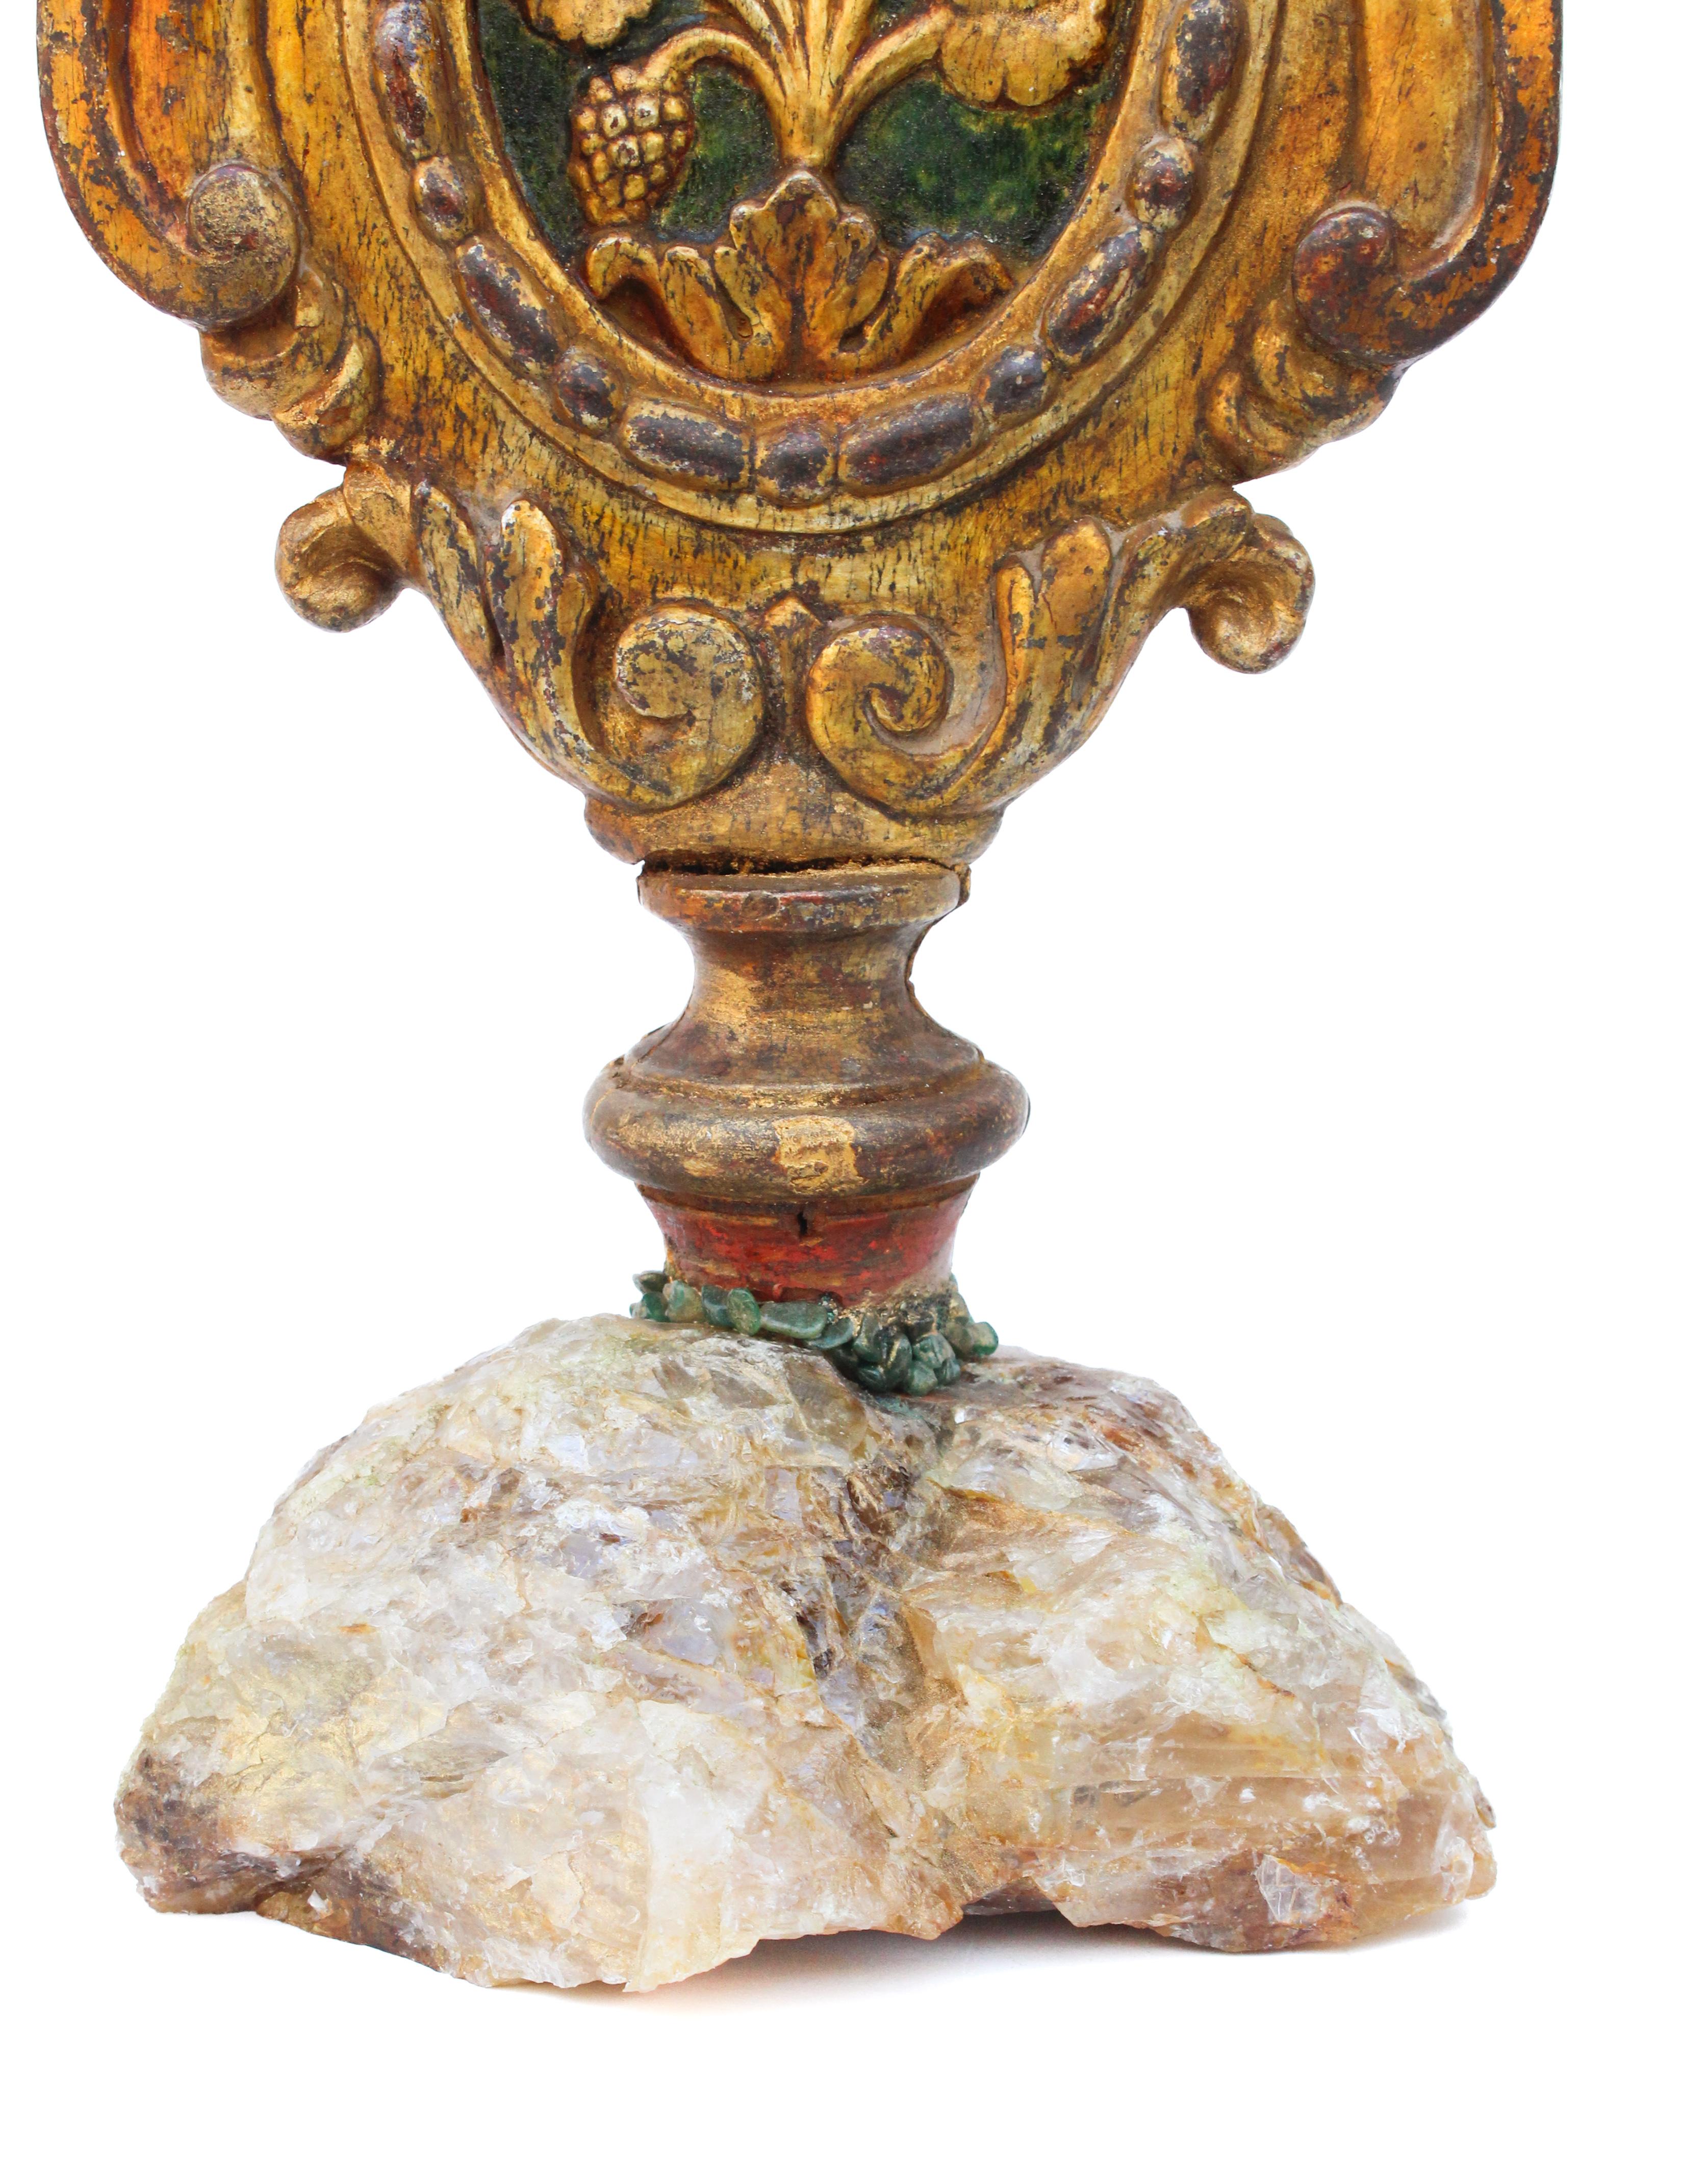 Sculptural 18th Century Italian Processional Finial Mounted on Honey Calcite In Good Condition For Sale In Dublin, Dalkey